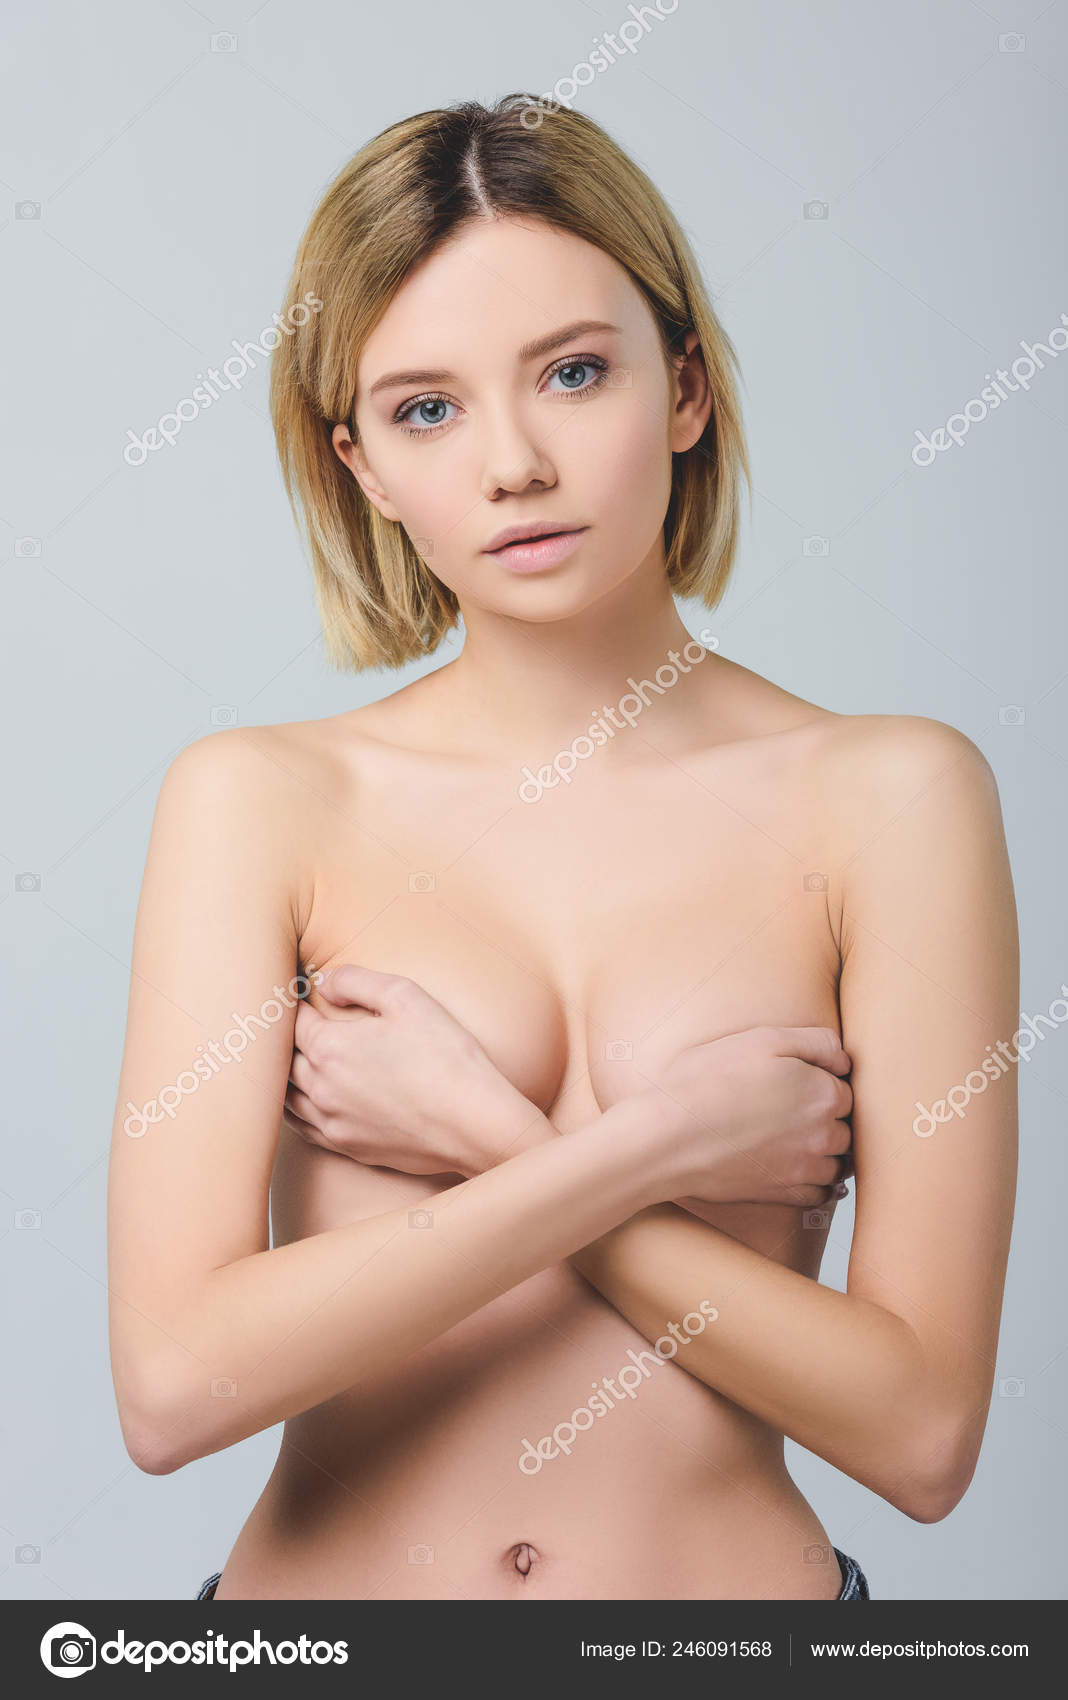 Pictures of naked young women